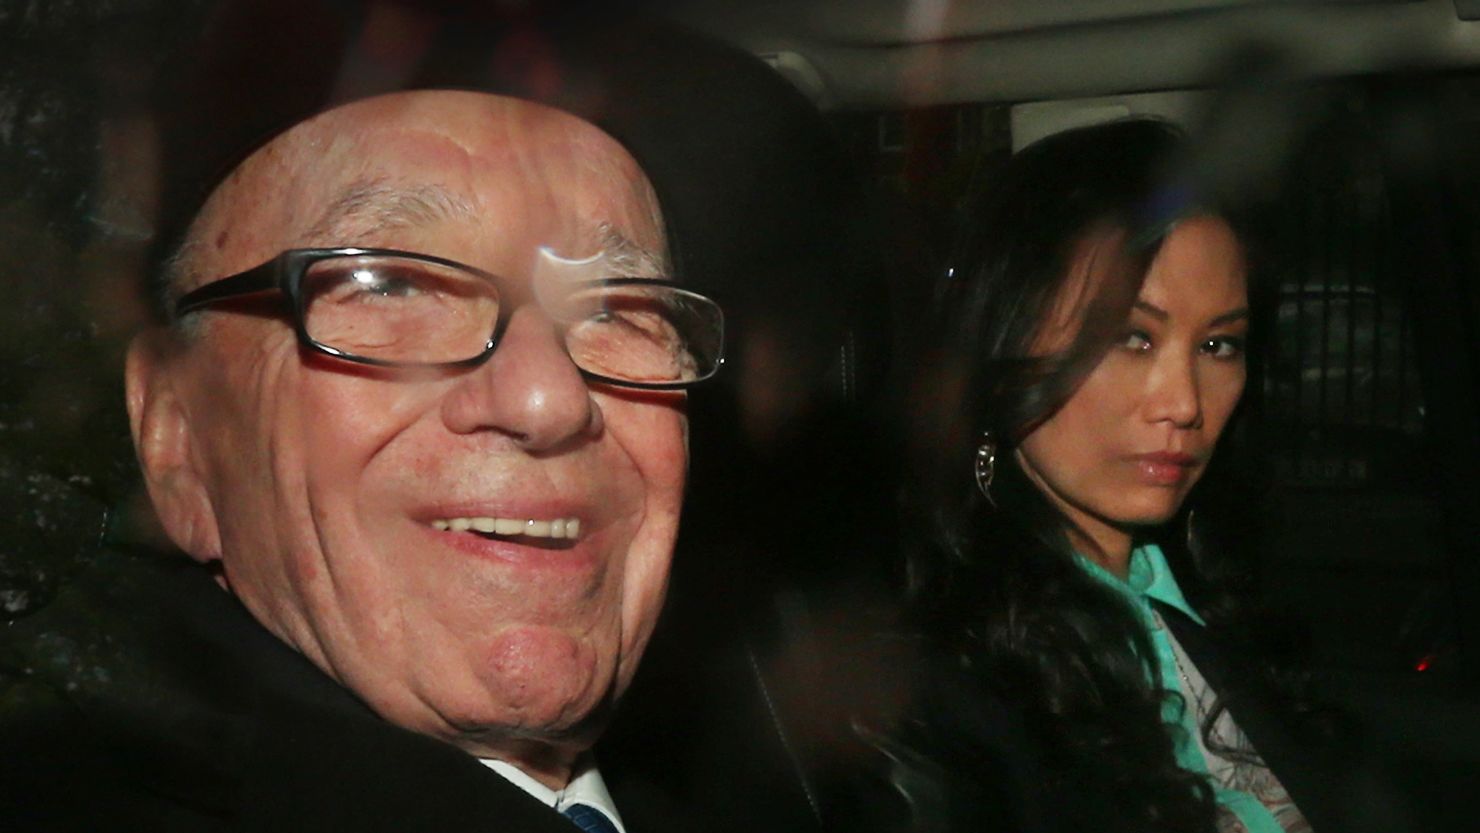 Rupert Murdoch leaves The Royal Courts of Justice with his wife Wendi Deng Murdoch after giving evidence to The leveson Inquiry on April 25 in London, England.